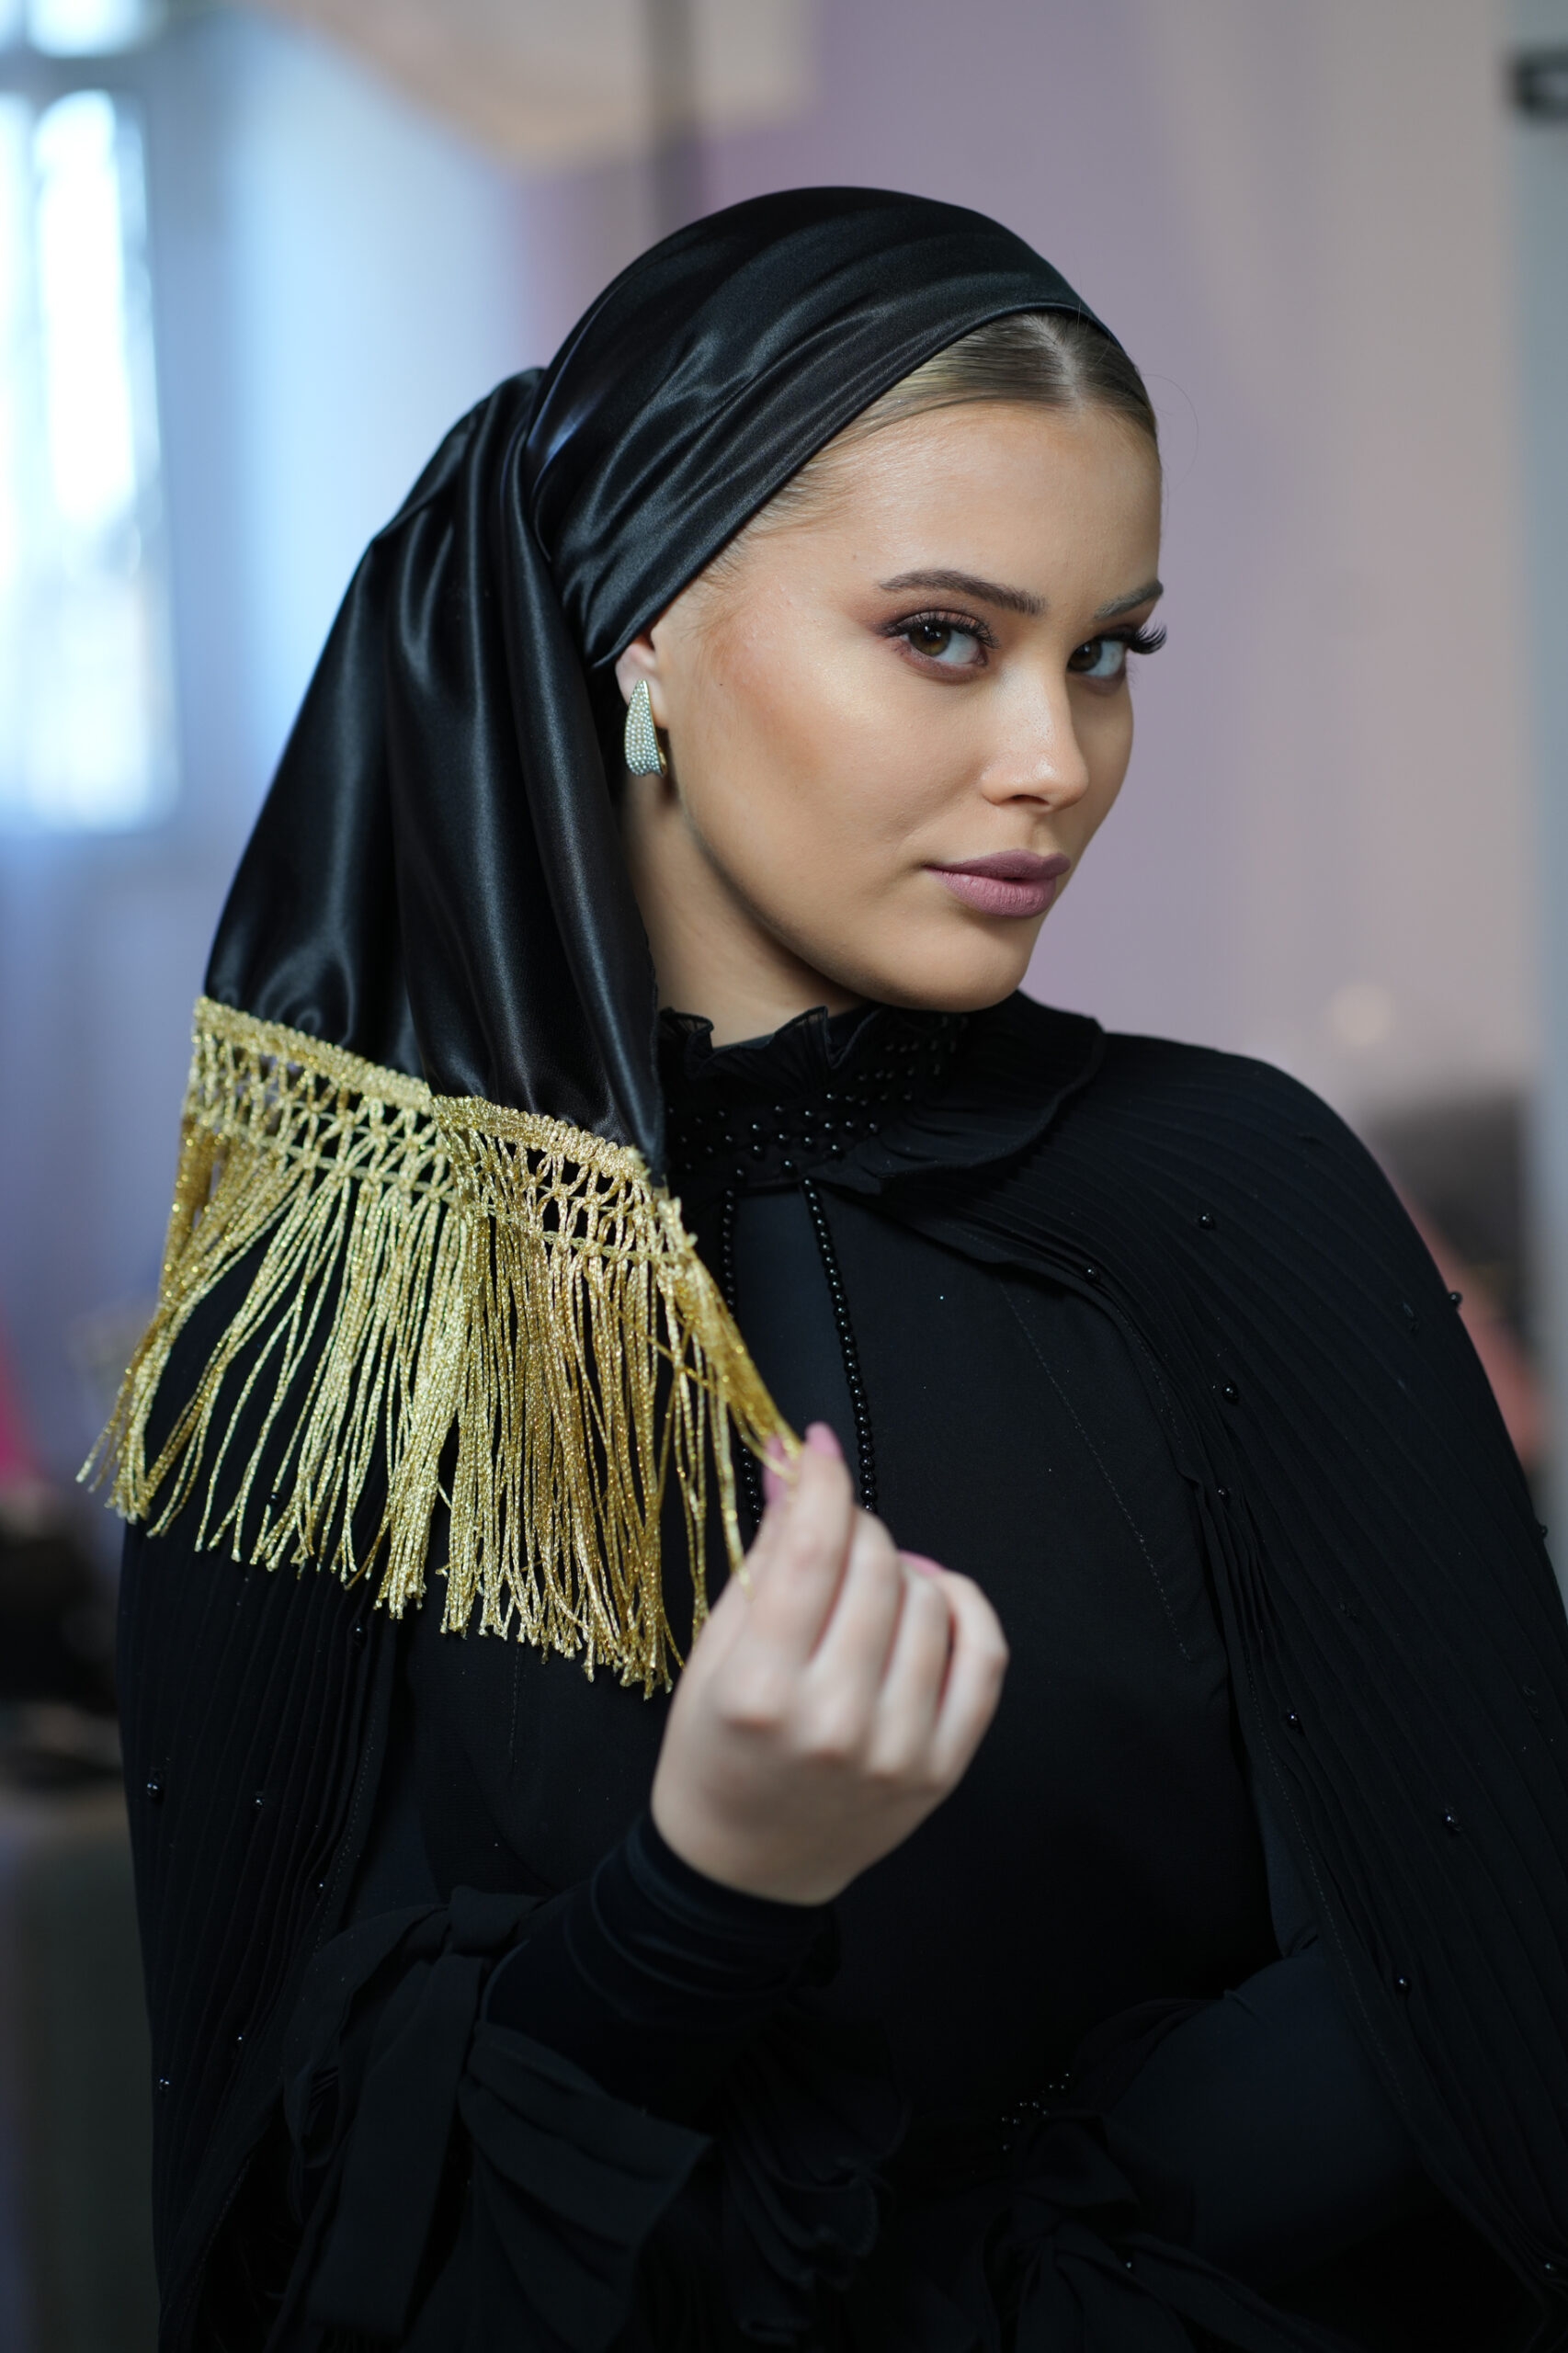 Black satin headscarf with Gold fringes